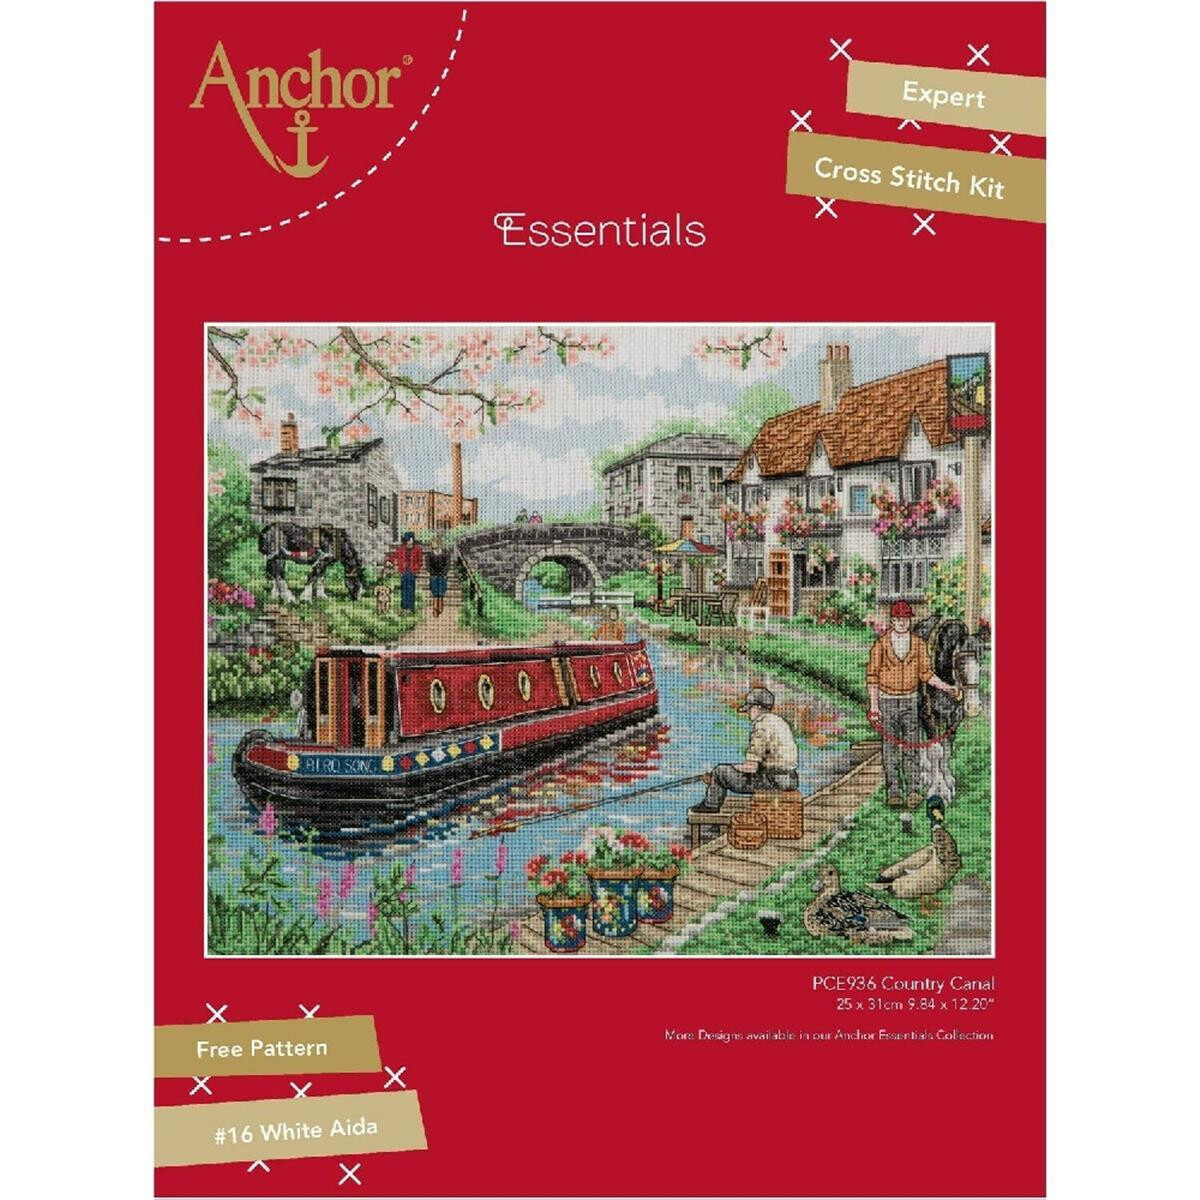 Anchor counted Cross Stitch kit "Country...